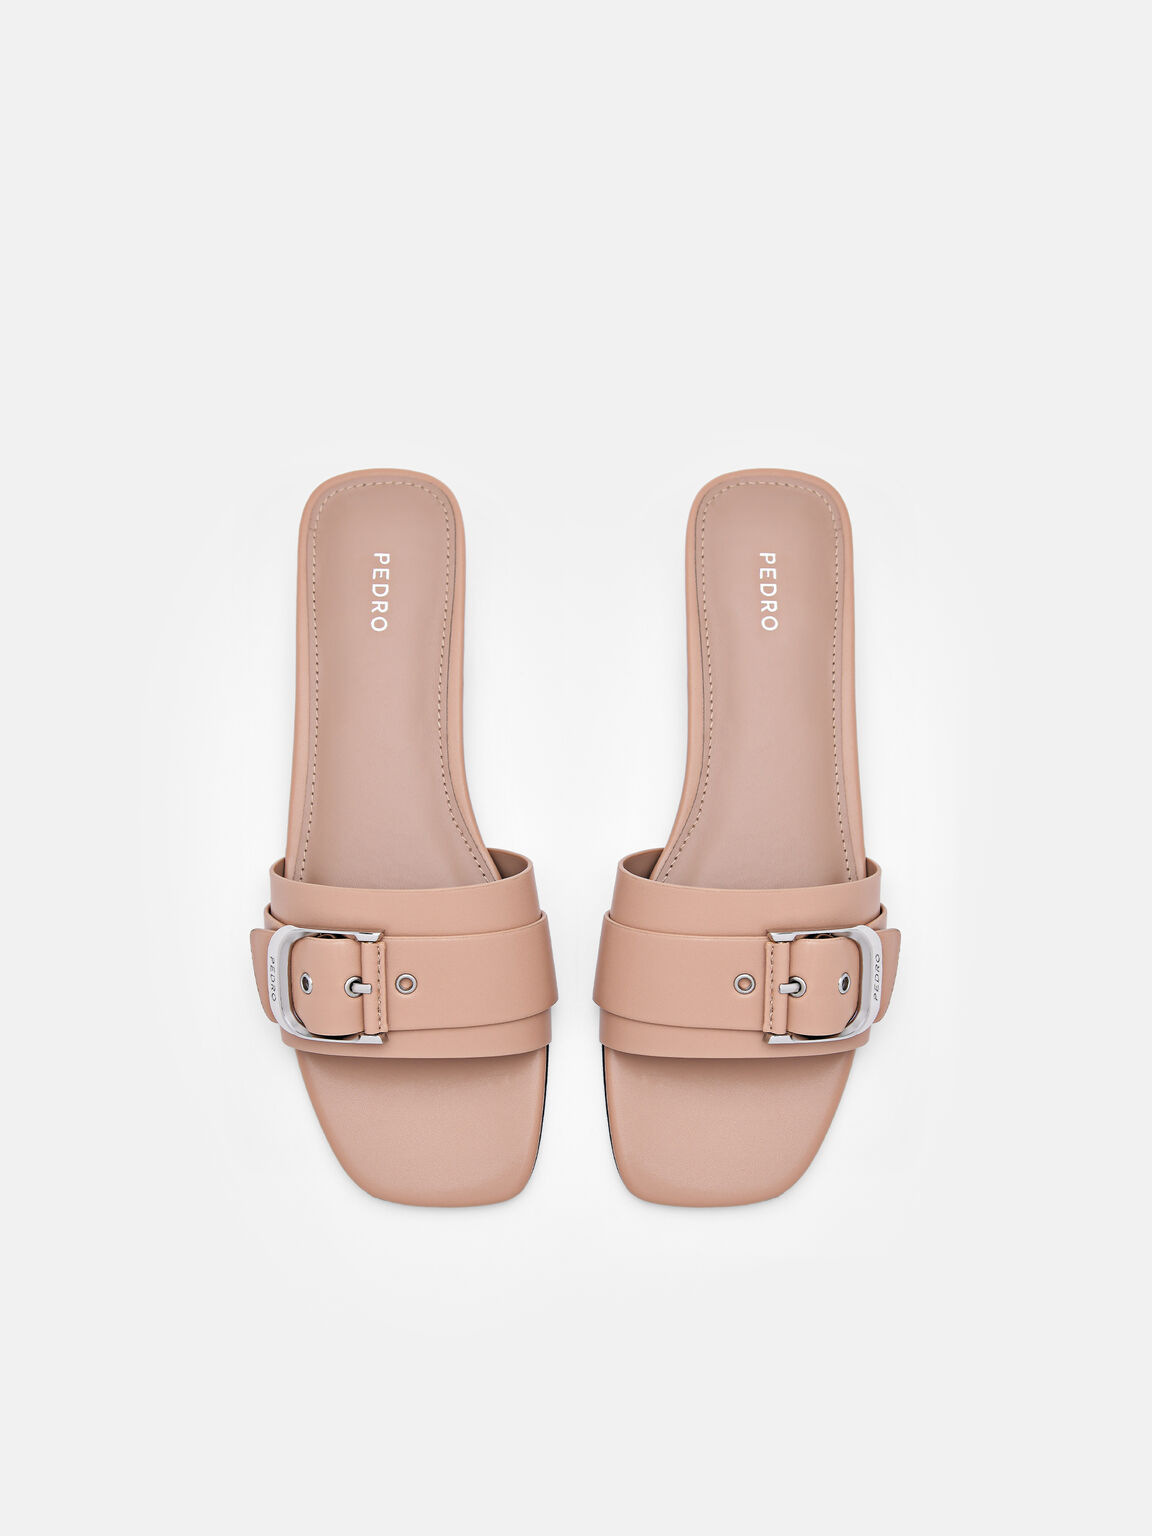 Helix Buckle Sandals, Taupe